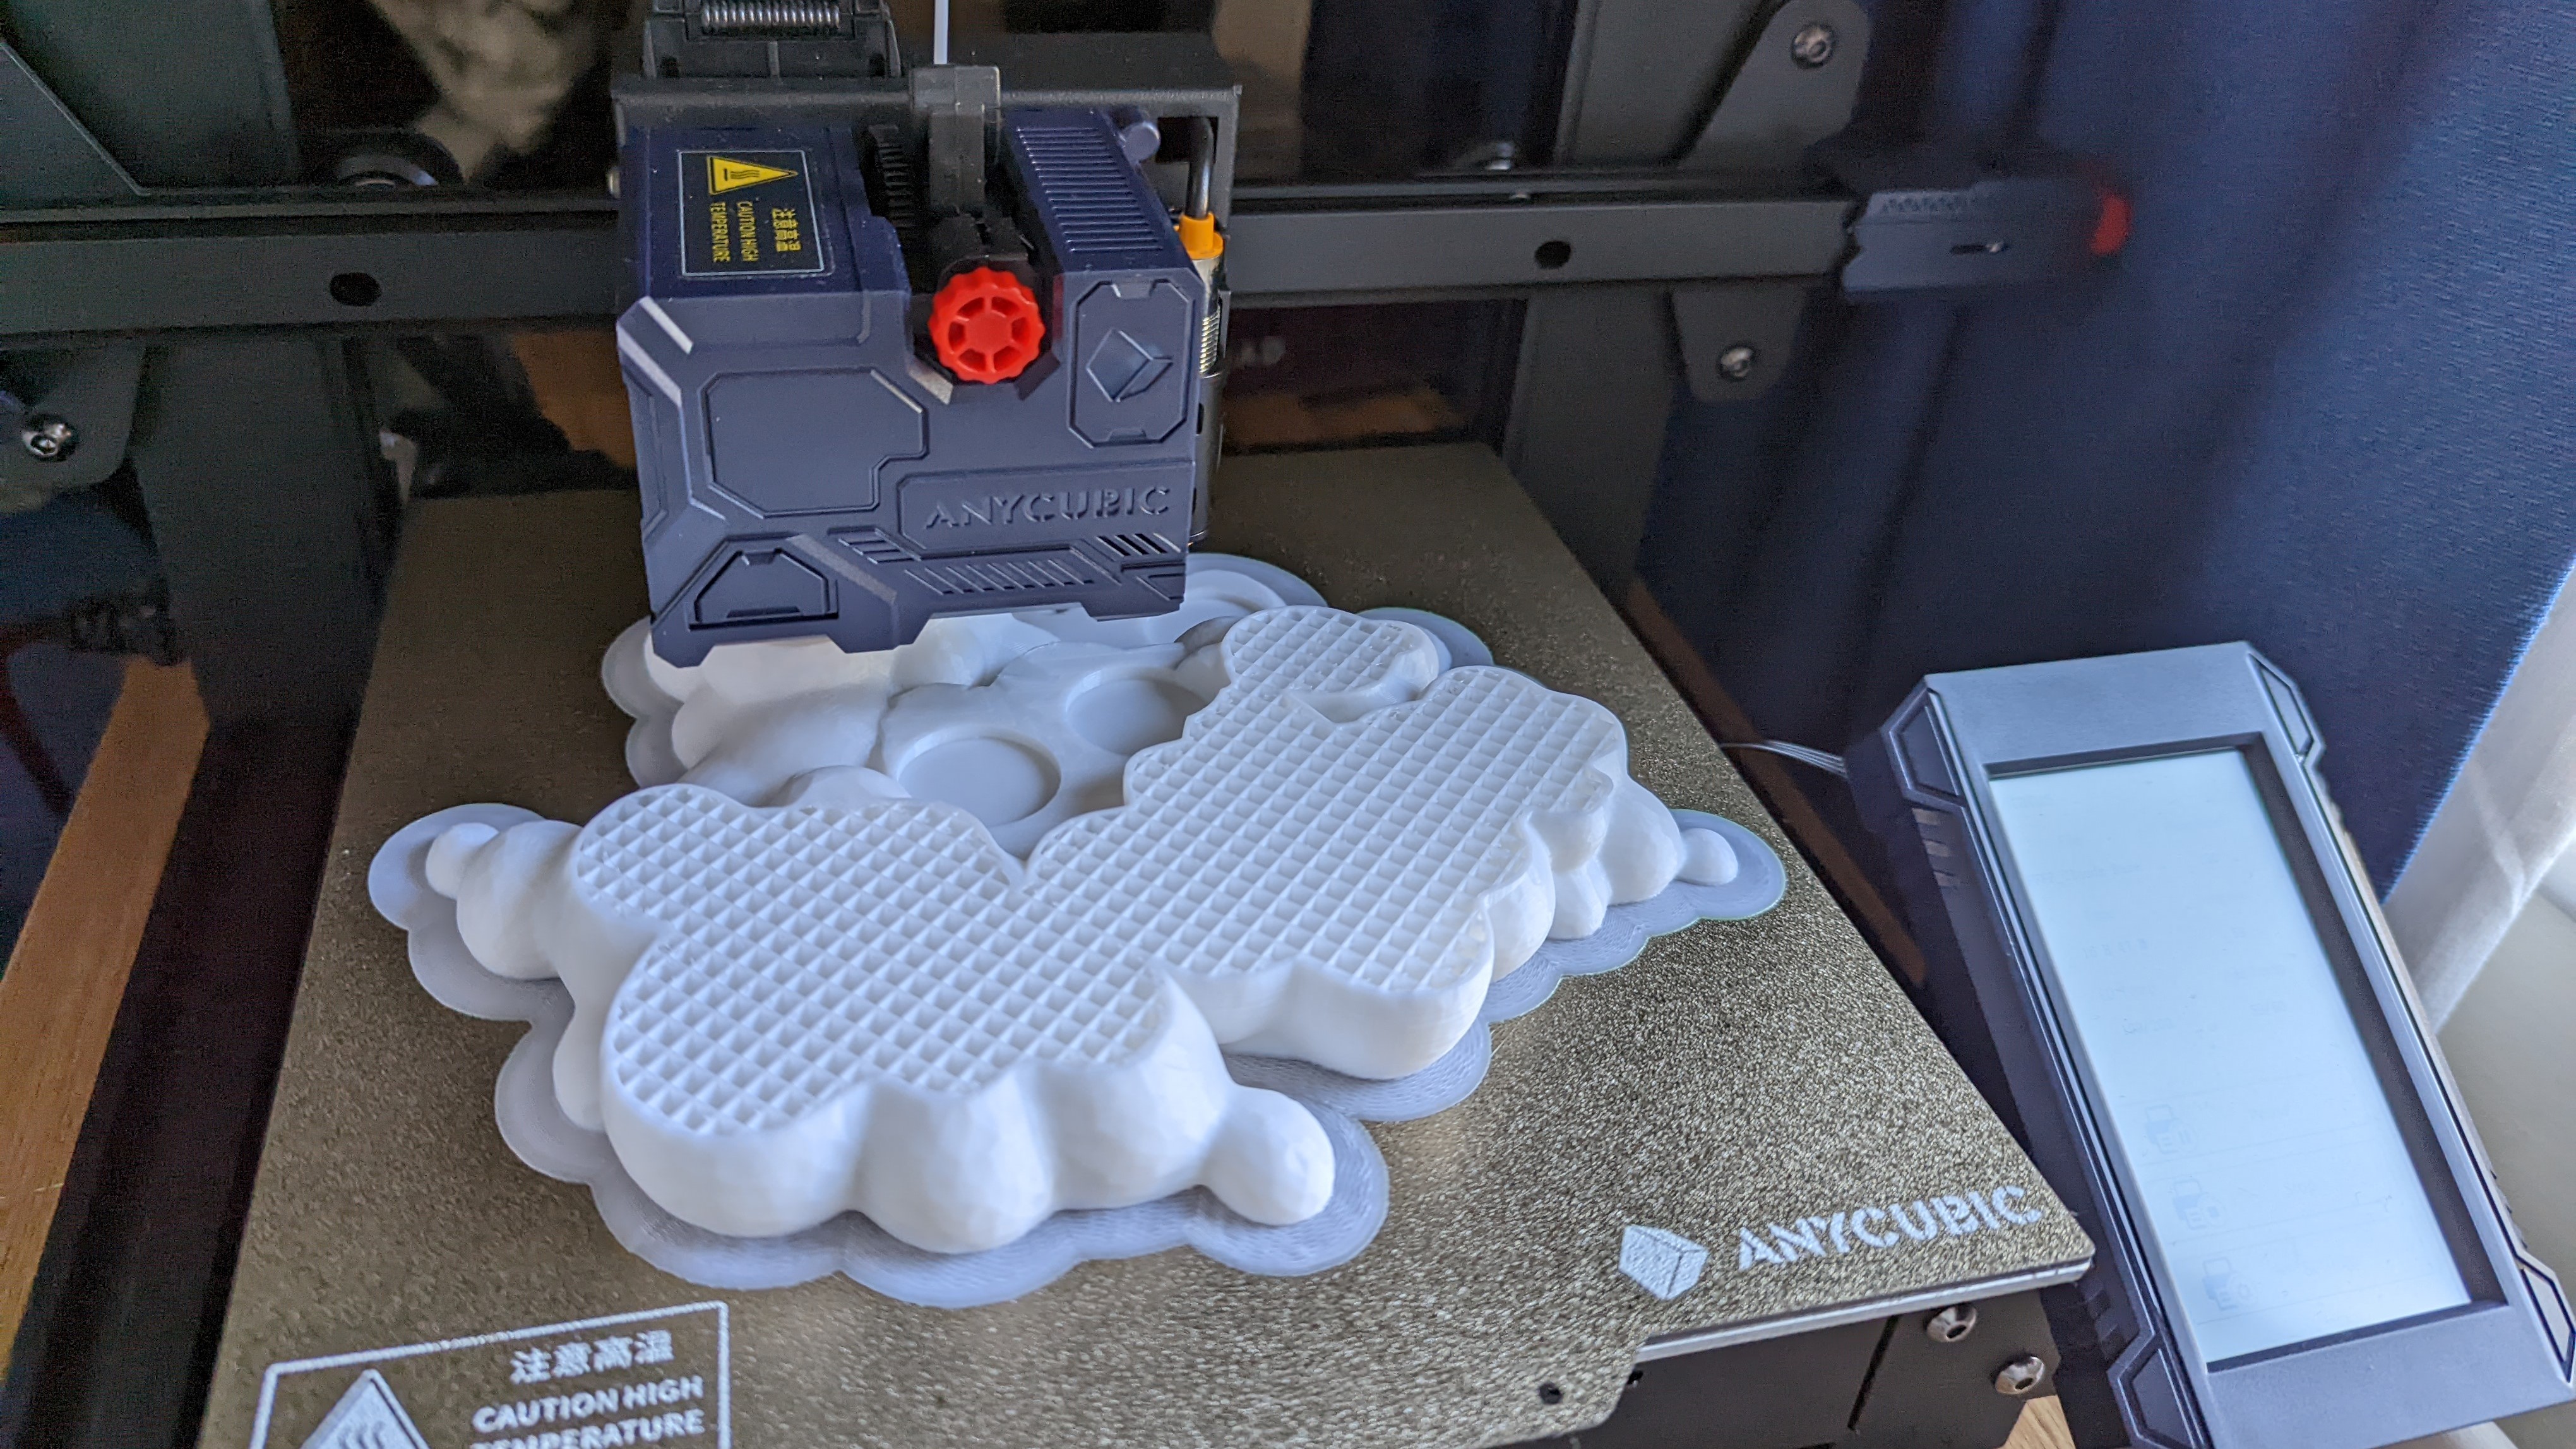 AnyCubic Kobra printing a model designed to look like clouds